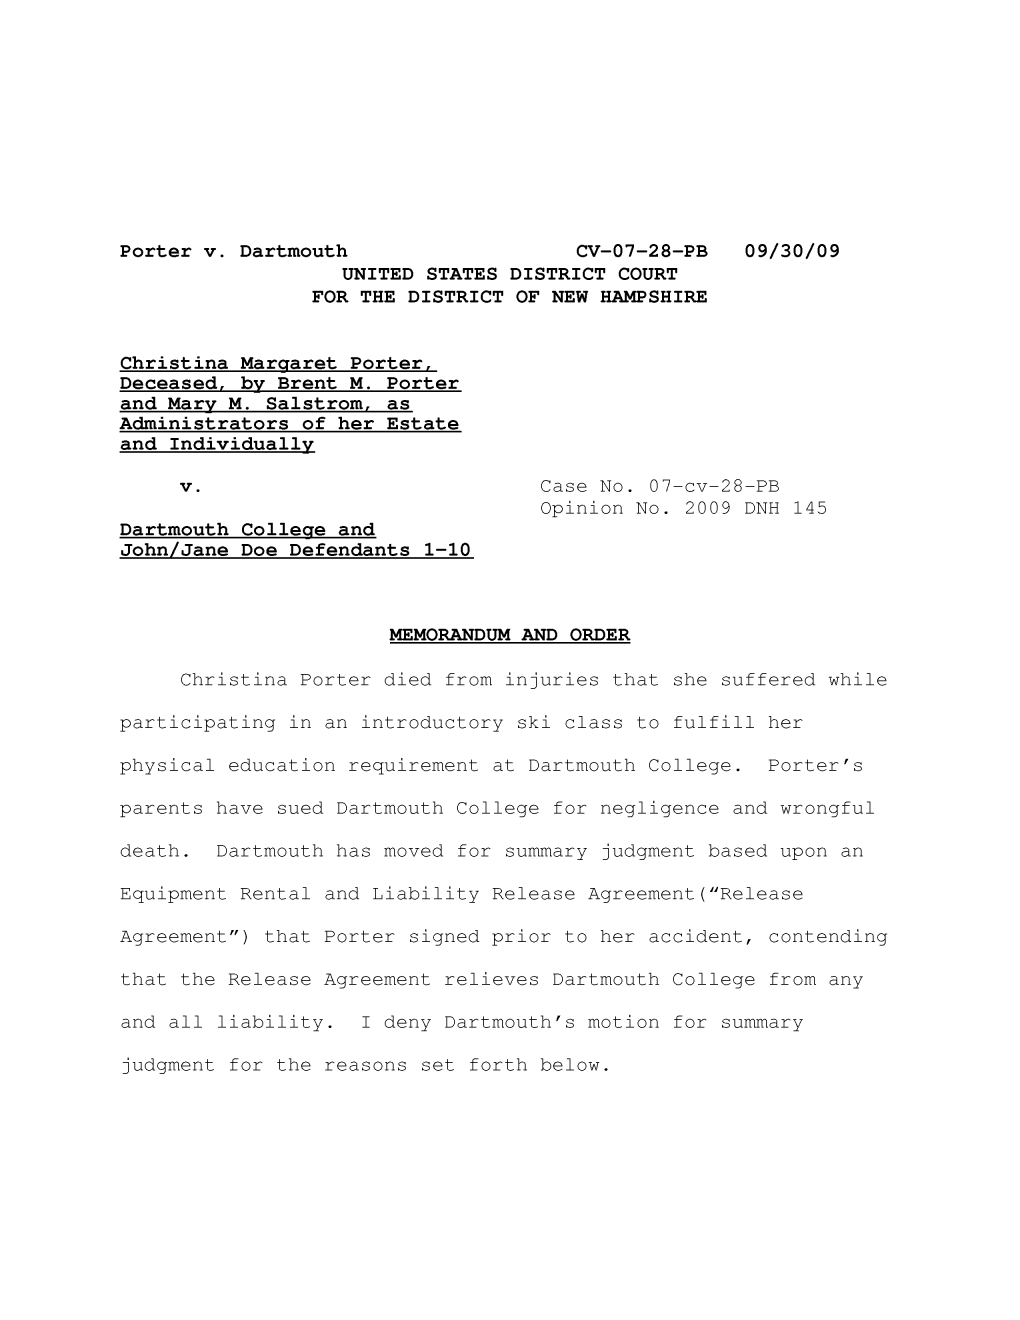 Porter V. Dartmouth CV-07-28-PB 09/30/09 UNITED STATES DISTRICT COURT for the DISTRICT of NEW HAMPSHIRE